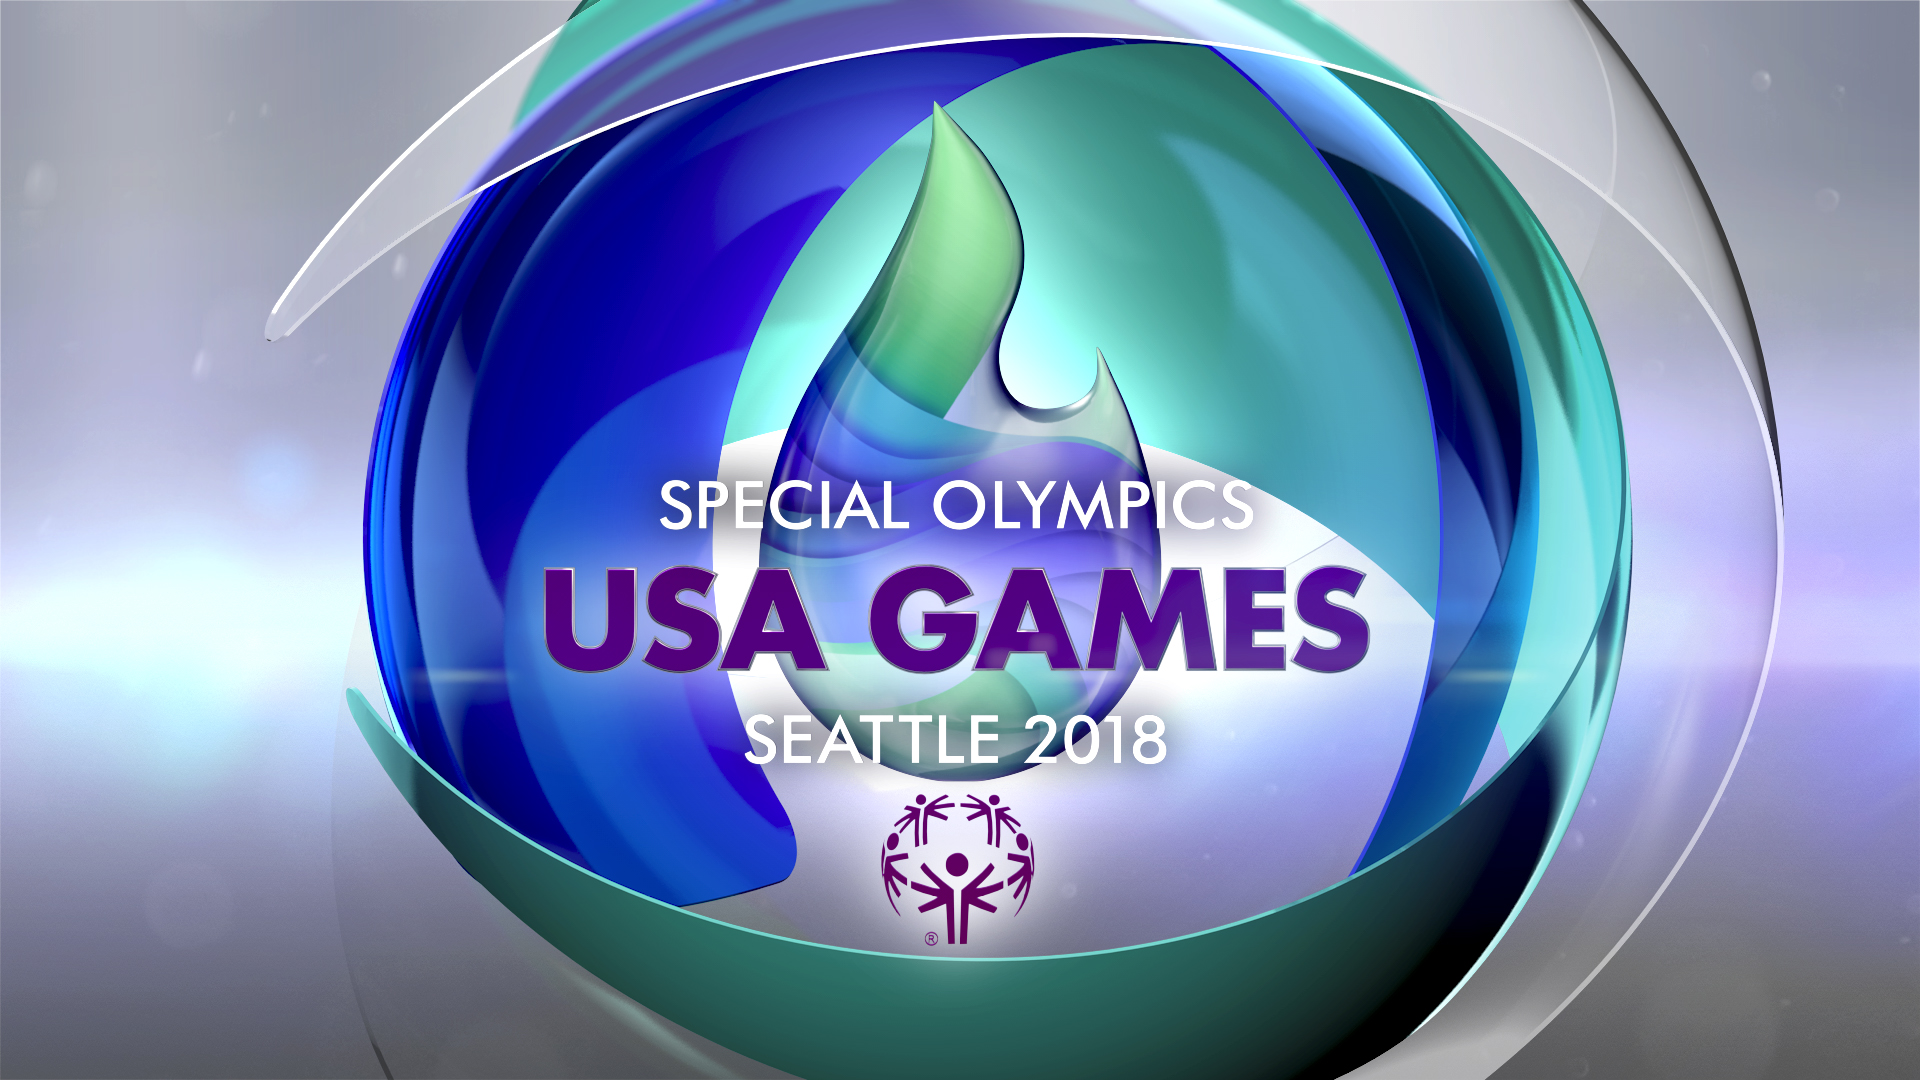 02_Special Olympics USA Games.jpg